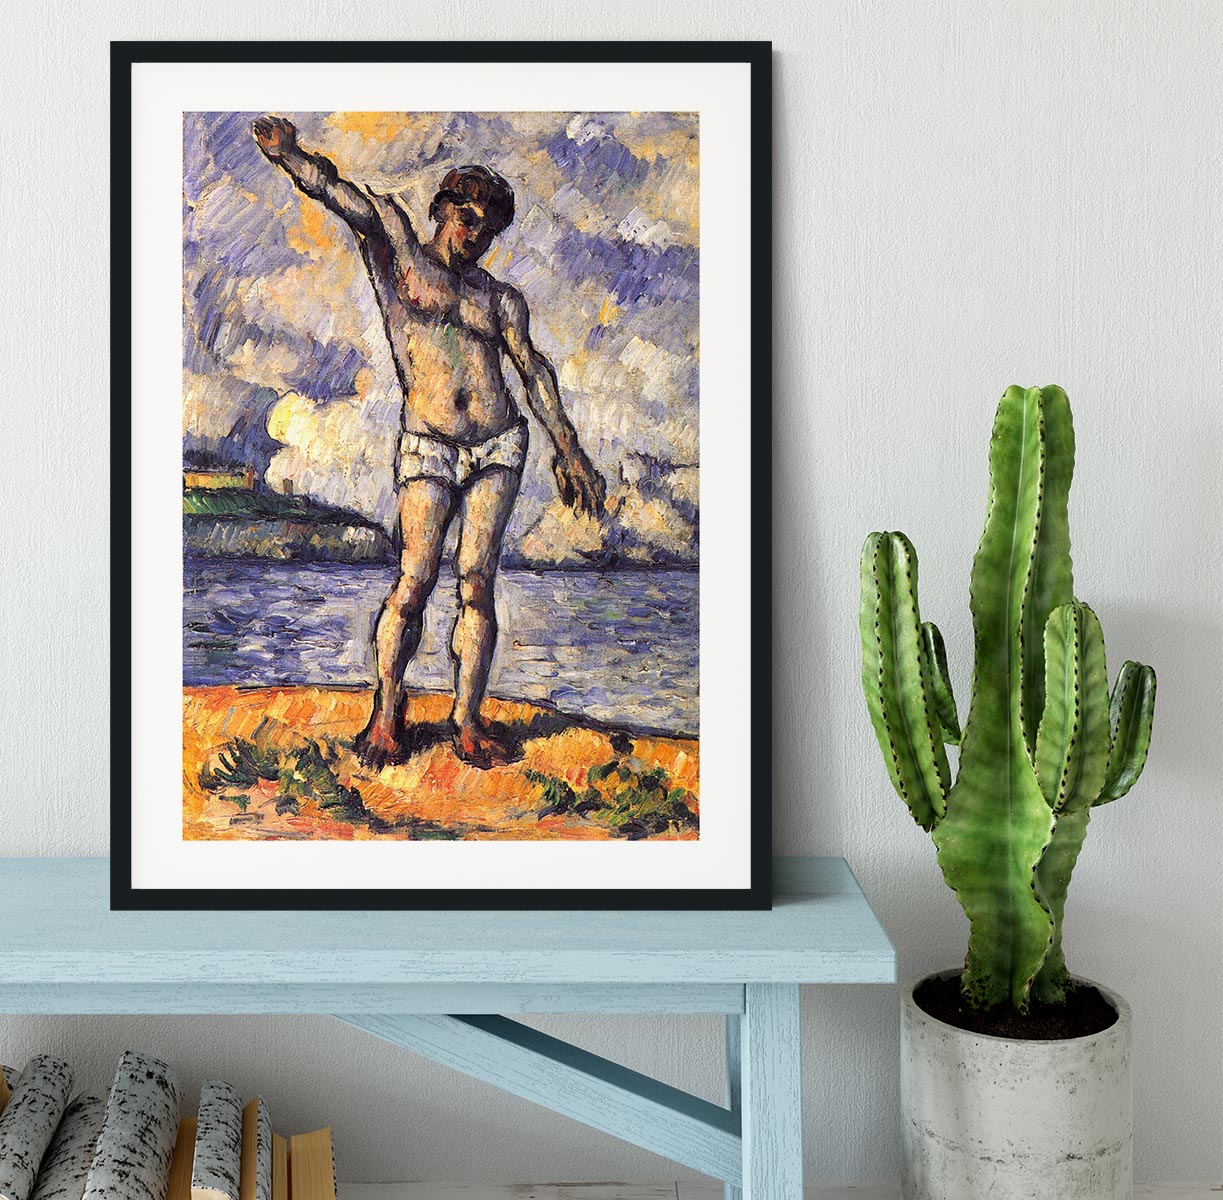 Swimmer with outstretched arms by Cezanne Framed Print - Canvas Art Rocks - 1